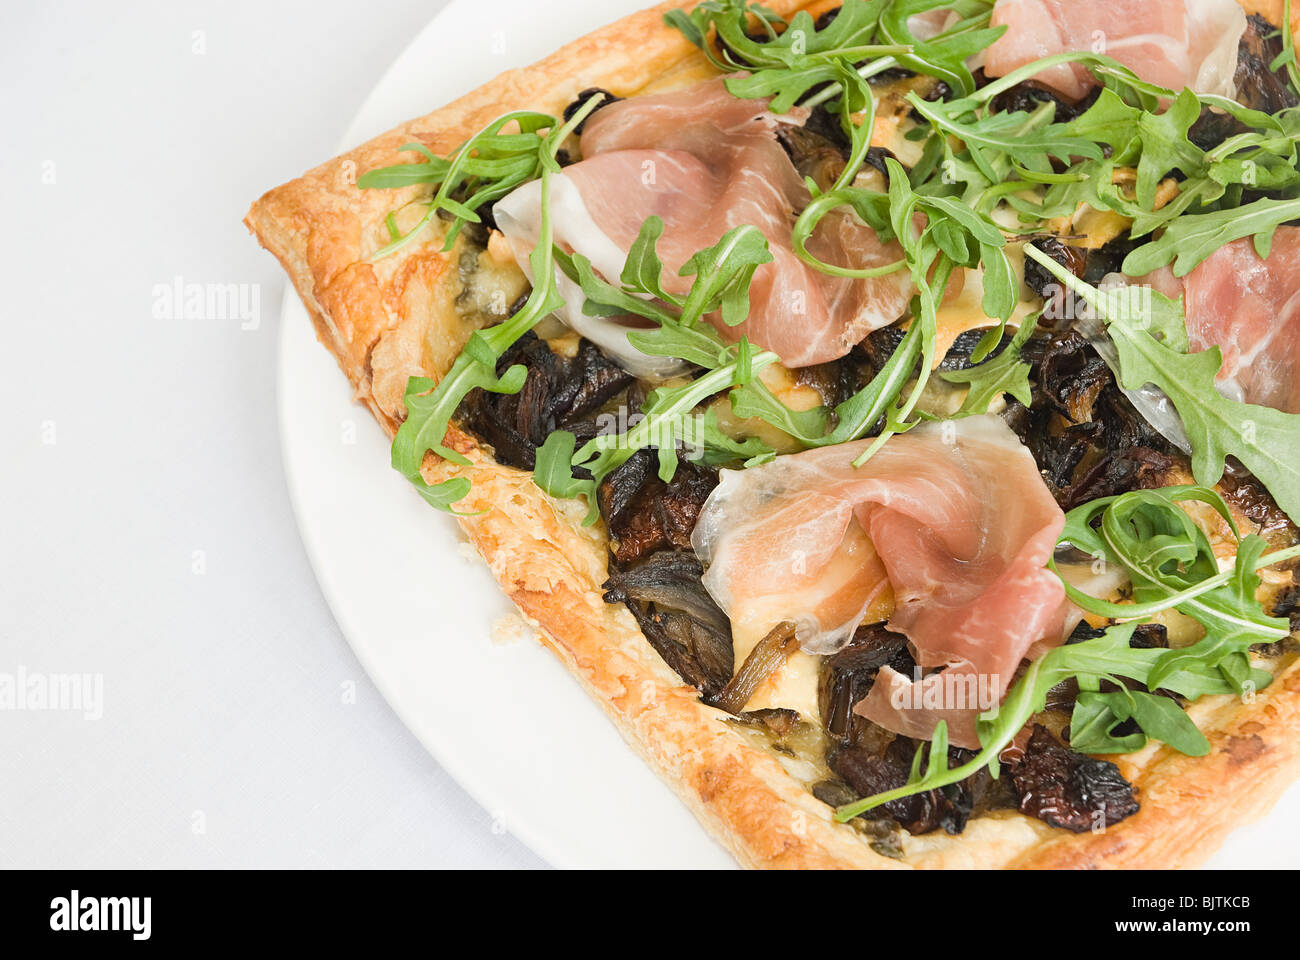 Filo pastry pizza topped with prosciutto, caramelized onion and rocket Stock Photo